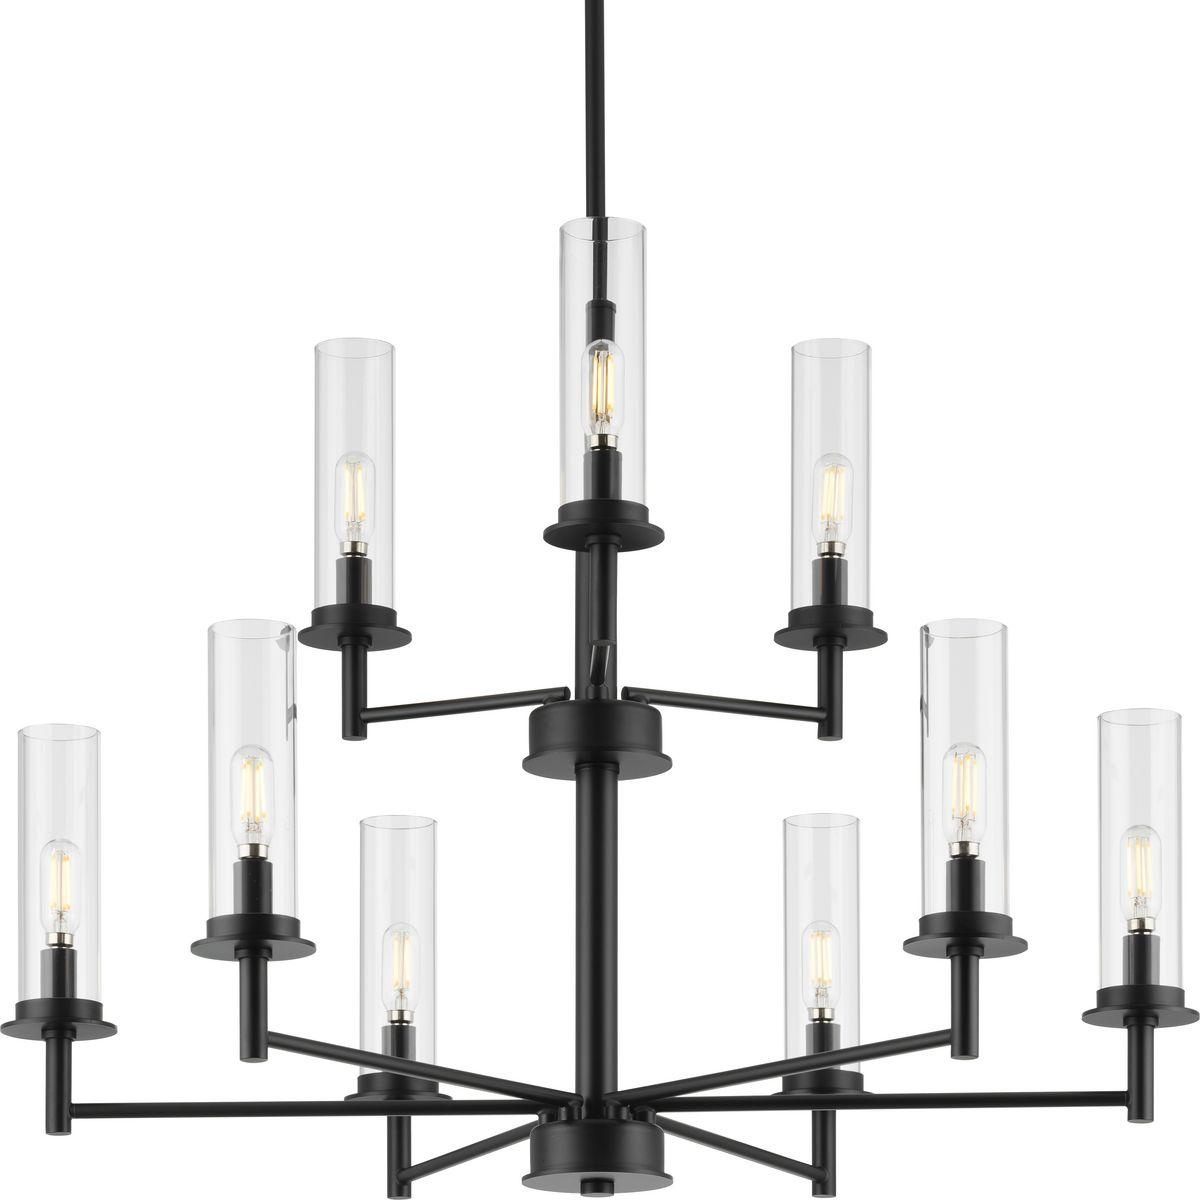 Hubbell P400252-031 Balance the best of modern and traditional with the Kellwyn Collection 9-Light Matte Black Clear Glass Transitional Chandelier Light. The classic frame with crisp, clean lines is coated in a beautiful matte black finish. Light sources glow from inside cyl